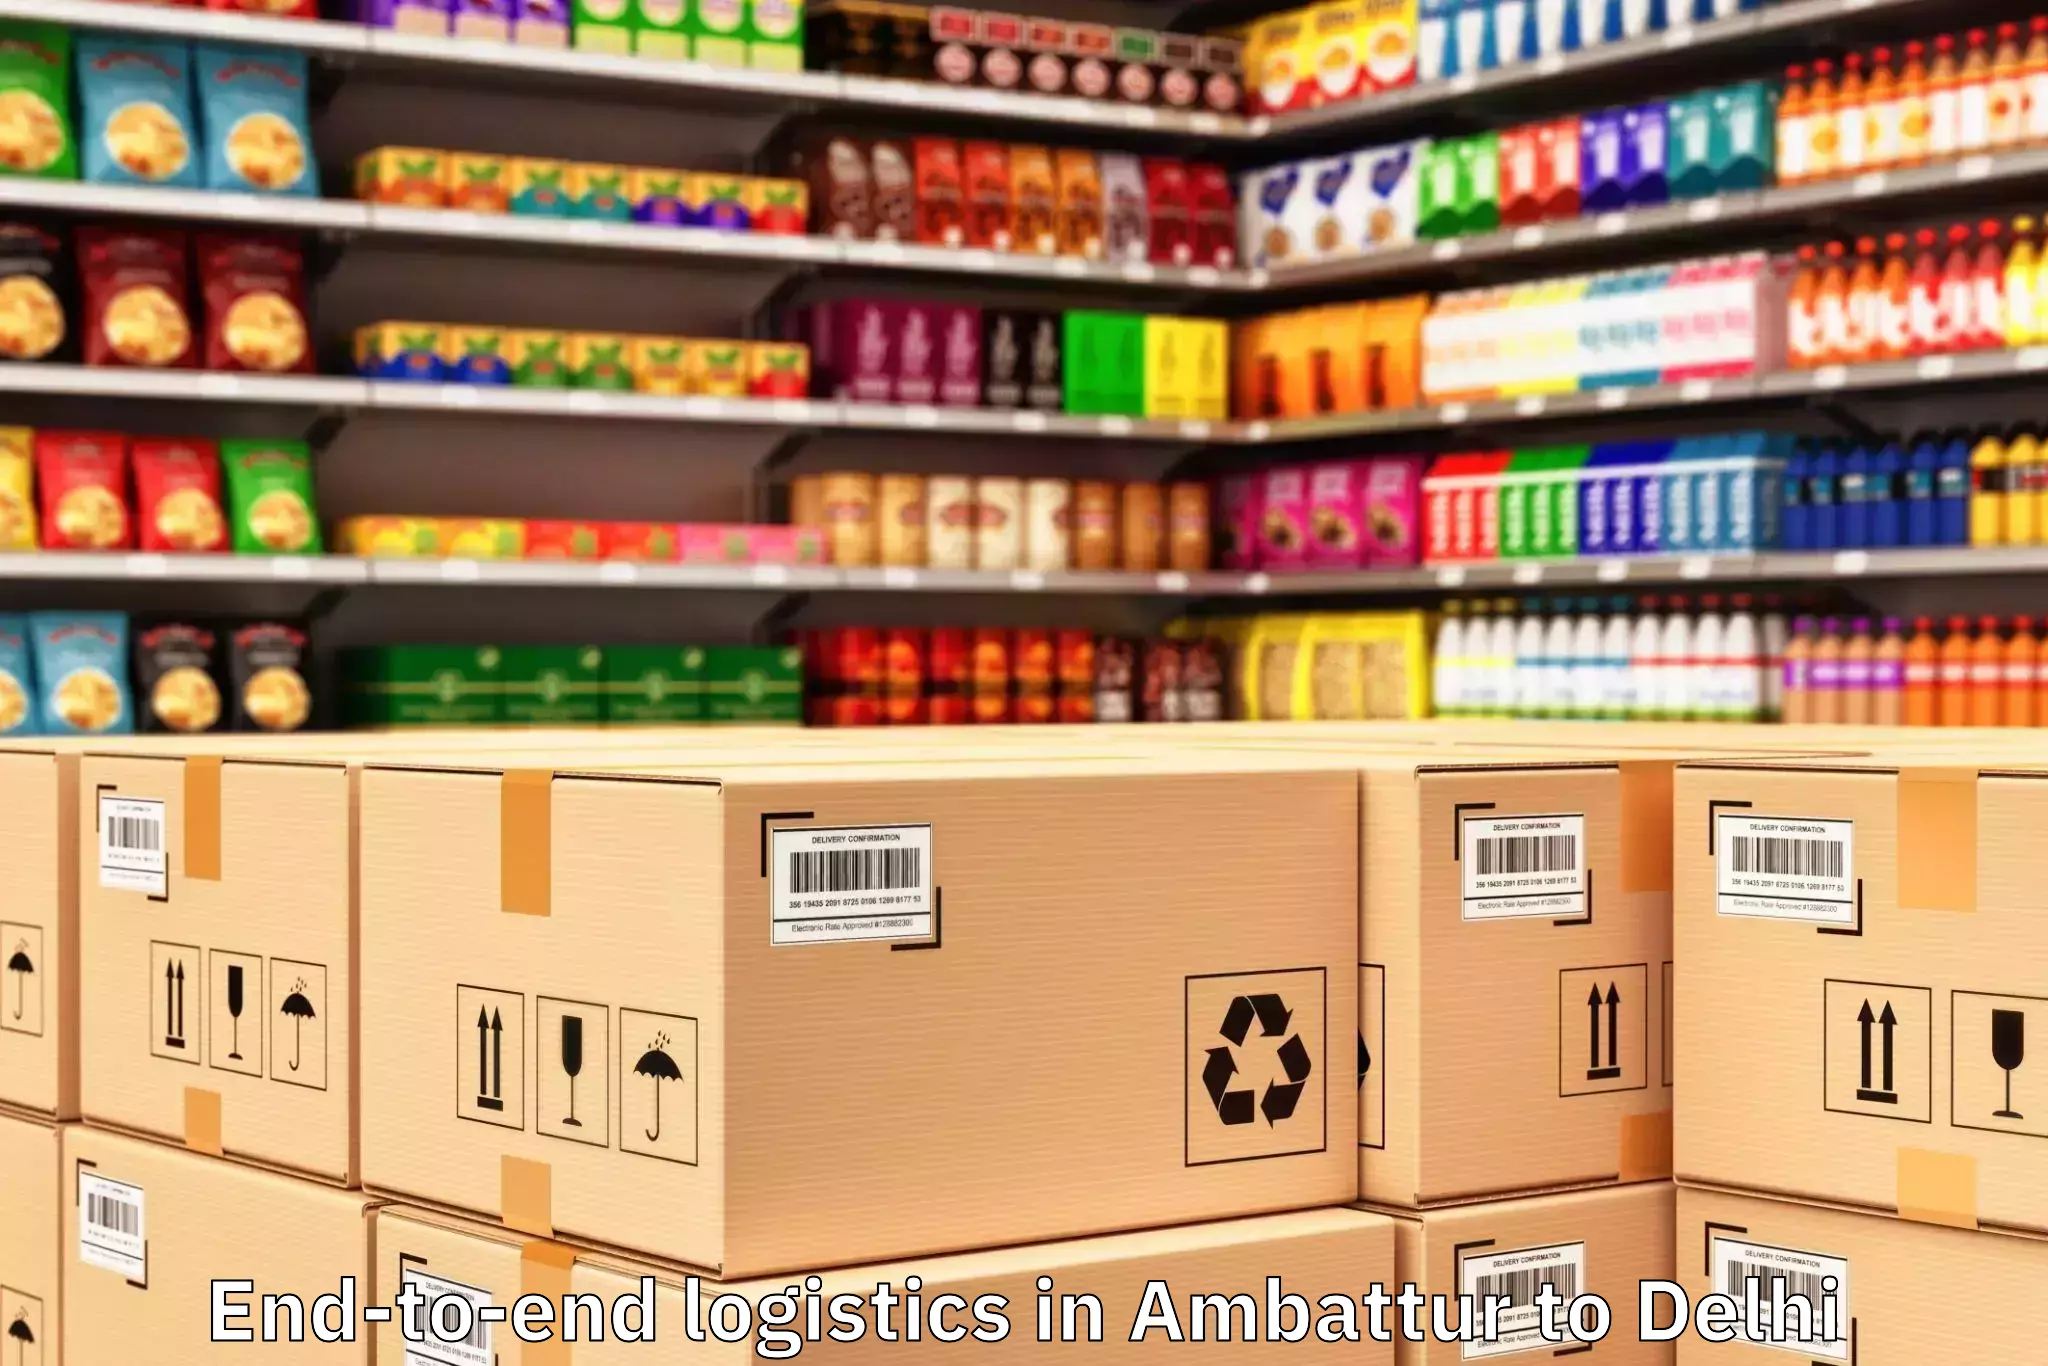 Ambattur to Functional Industrial Estate For Electronics End To End Logistics